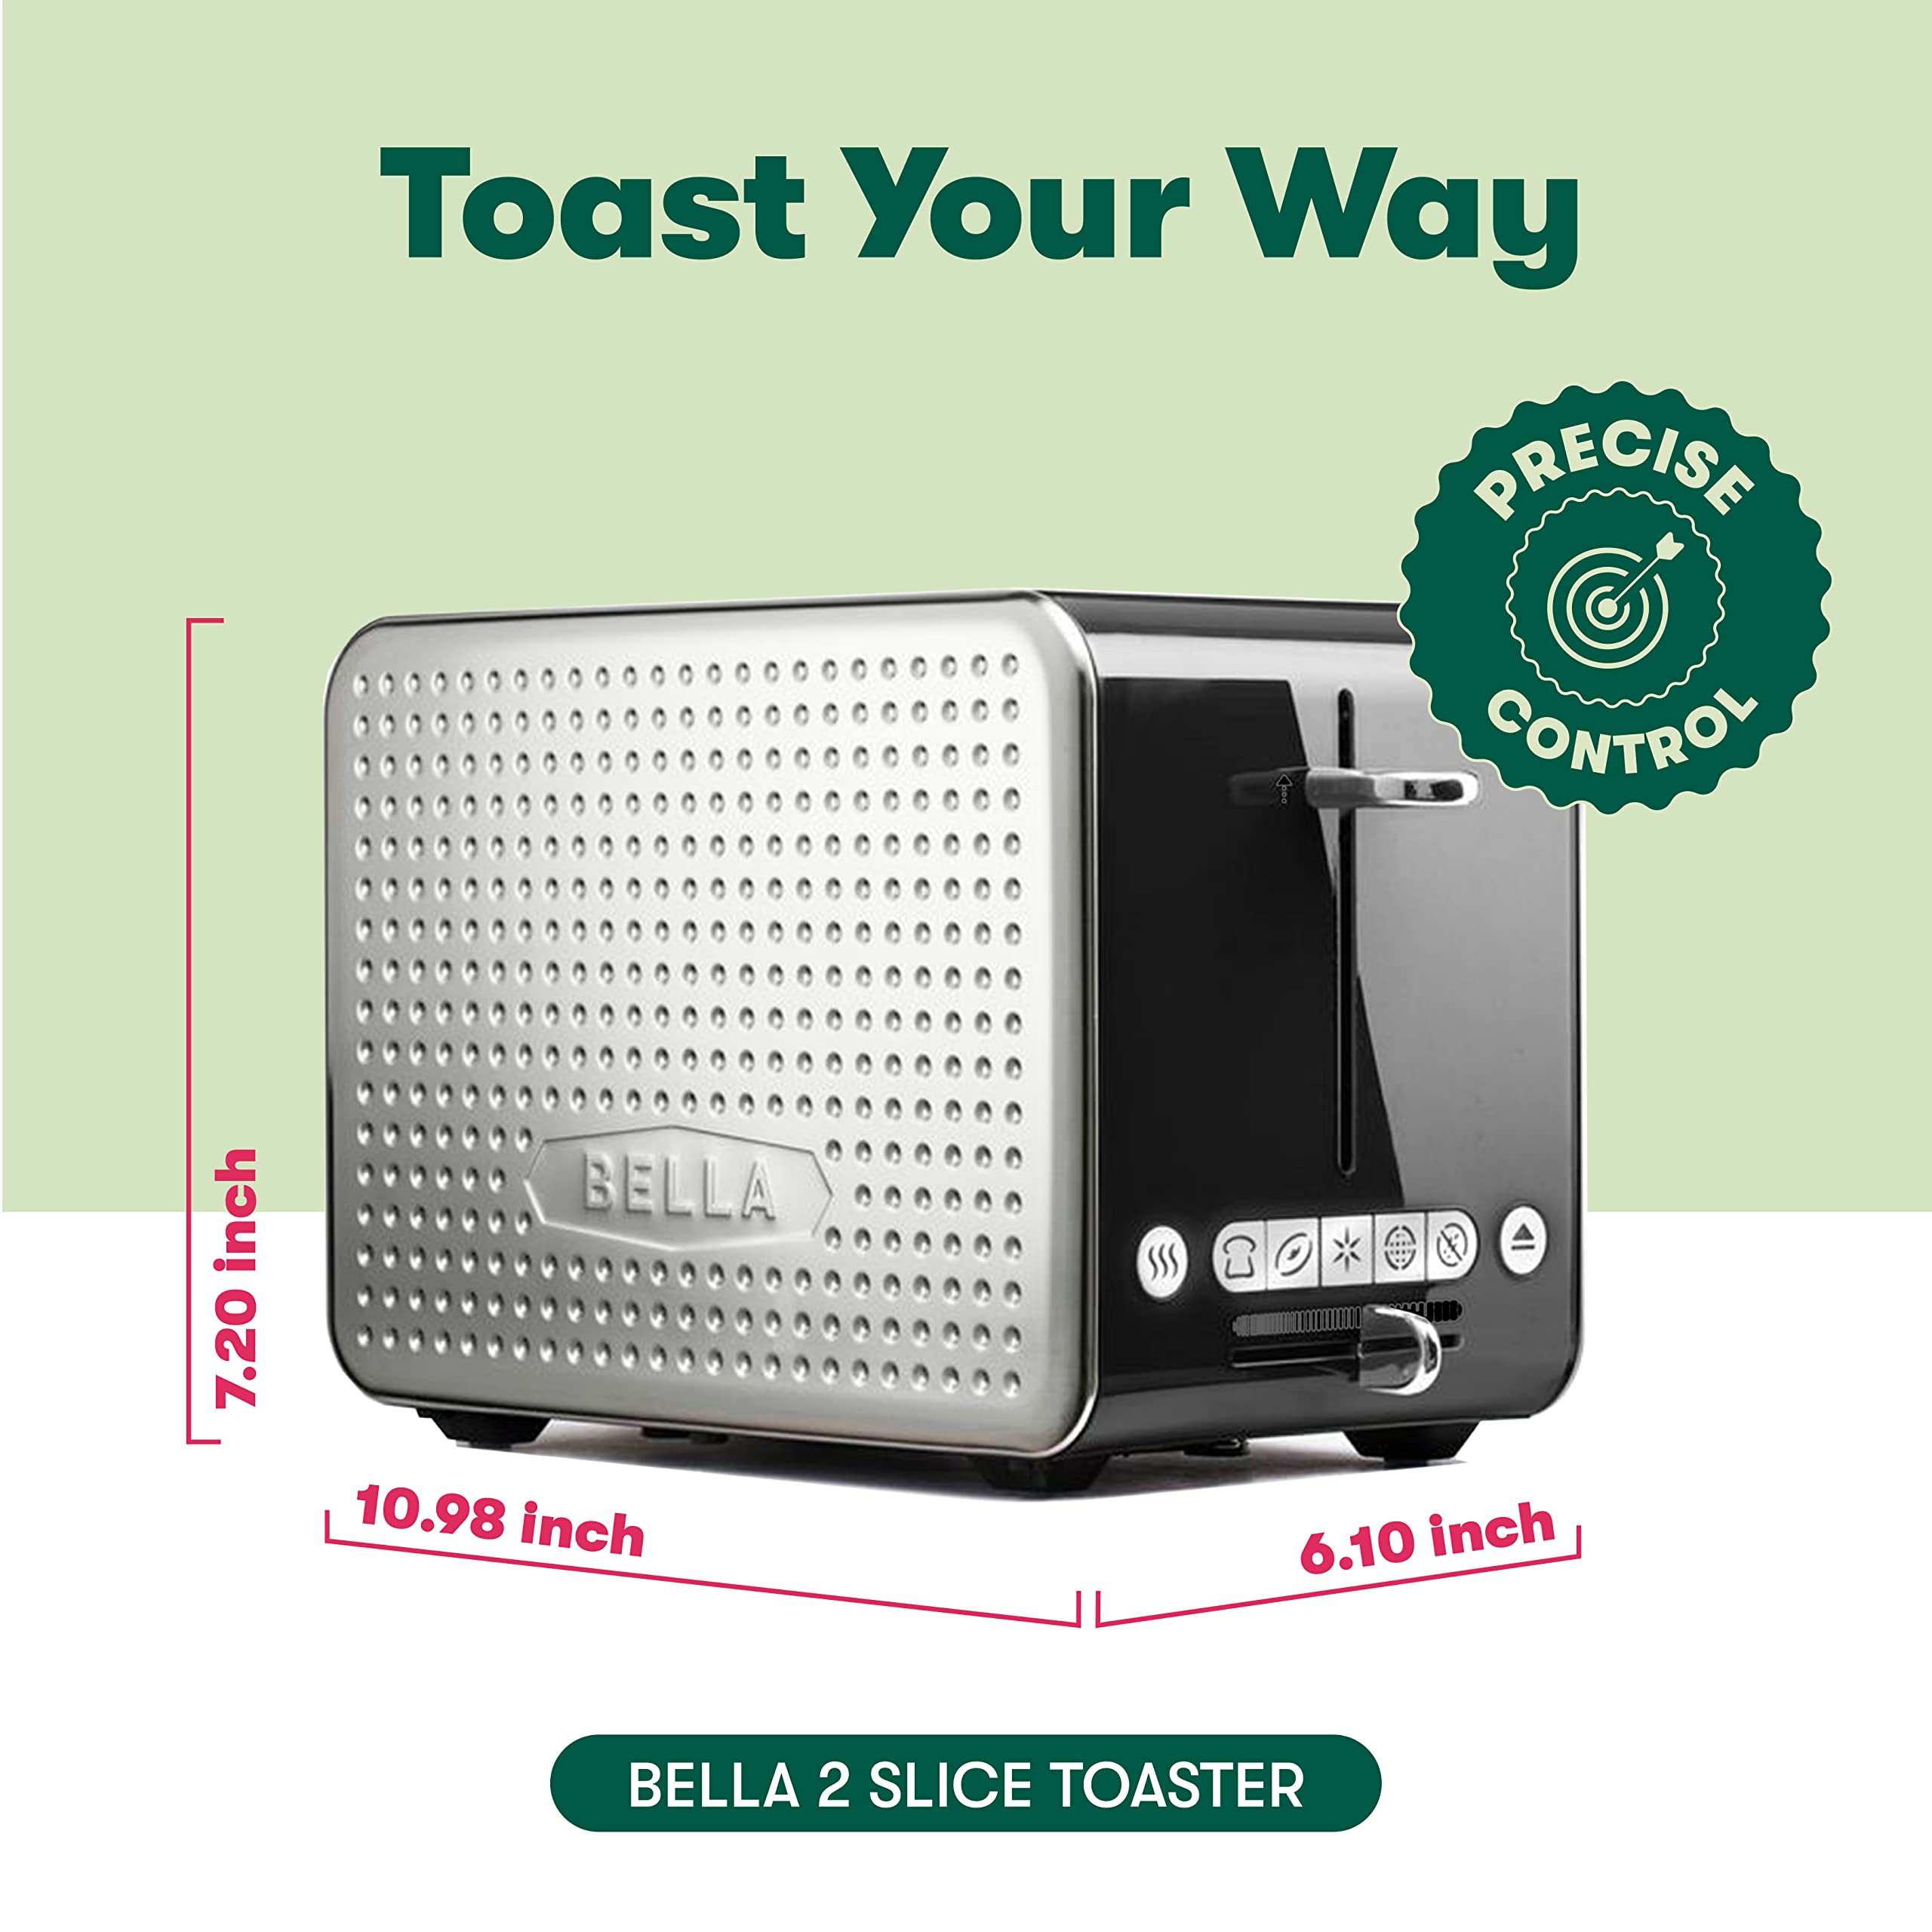 BELLA 2 Slice Toaster with Wide Slots, Touchscreen - Removable Crumb Tray, Adjustable Browning Control With Multiple Settings - Stainless Steel and Black